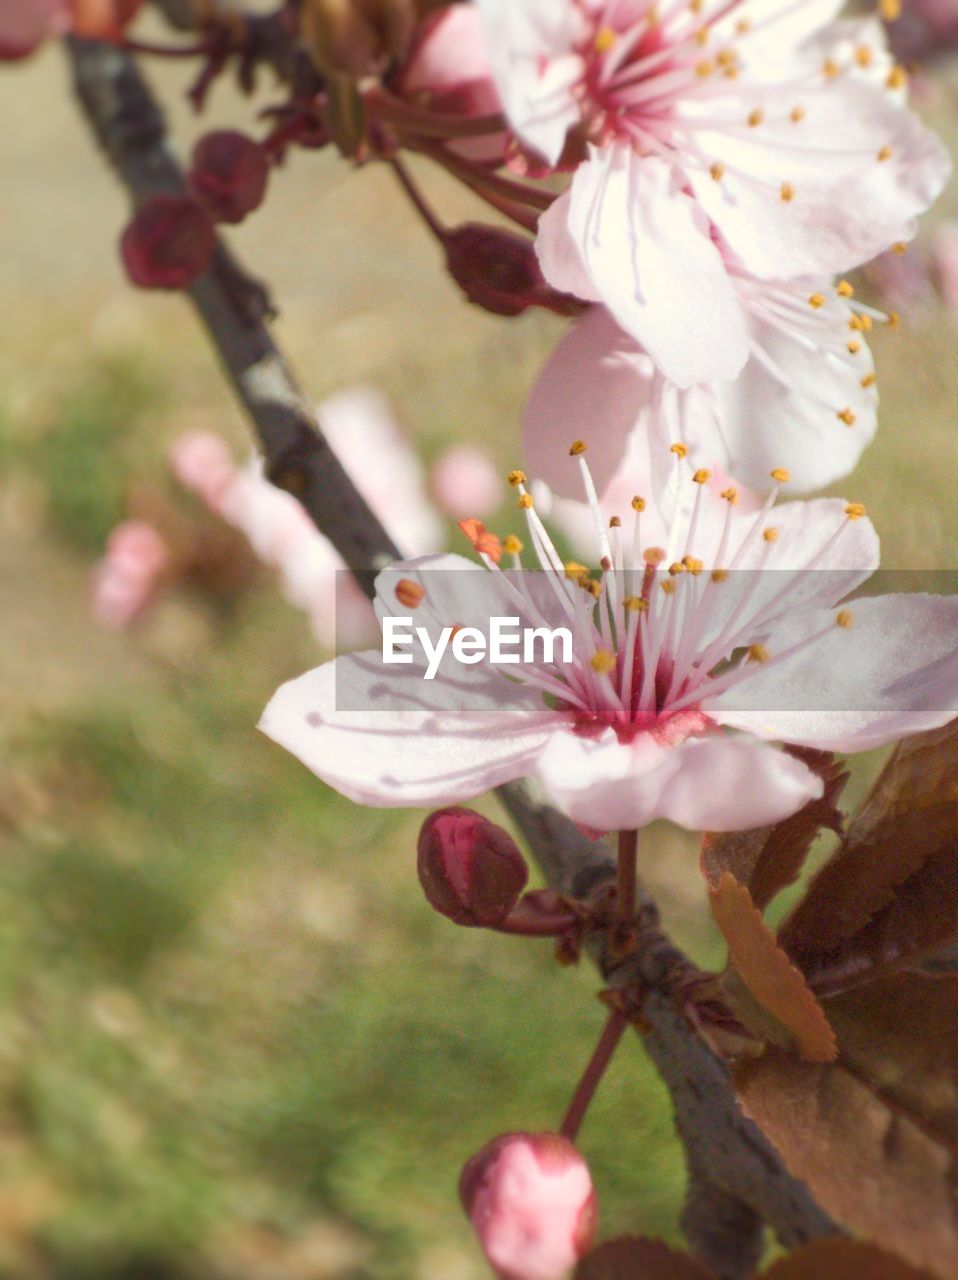 plant, flower, flowering plant, freshness, fragility, beauty in nature, blossom, growth, close-up, springtime, pink, nature, tree, pollen, petal, flower head, produce, stamen, inflorescence, branch, focus on foreground, food, no people, fruit tree, cherry blossom, botany, day, outdoors, spring, fruit, twig, selective focus, almond tree, white, cherry tree, orchard, apple tree